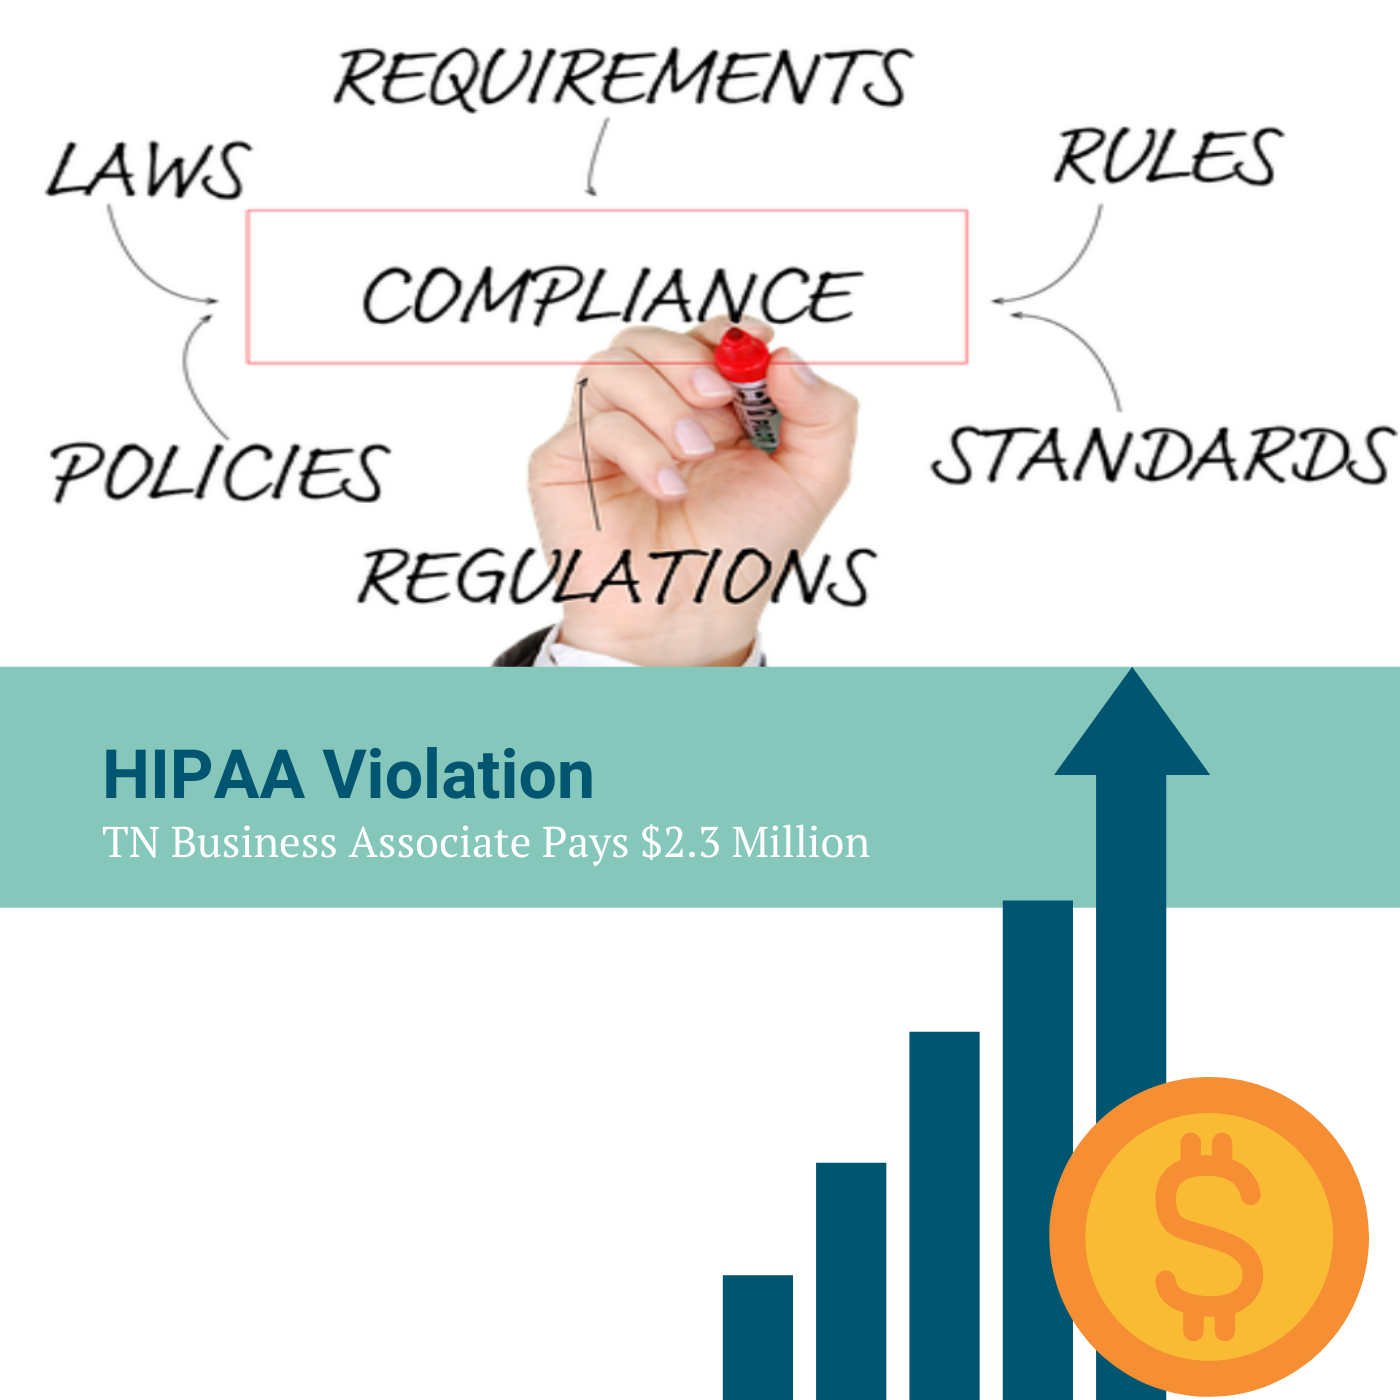 TN Business Associate Pays $2.3 Million in HIPAA Violations Image